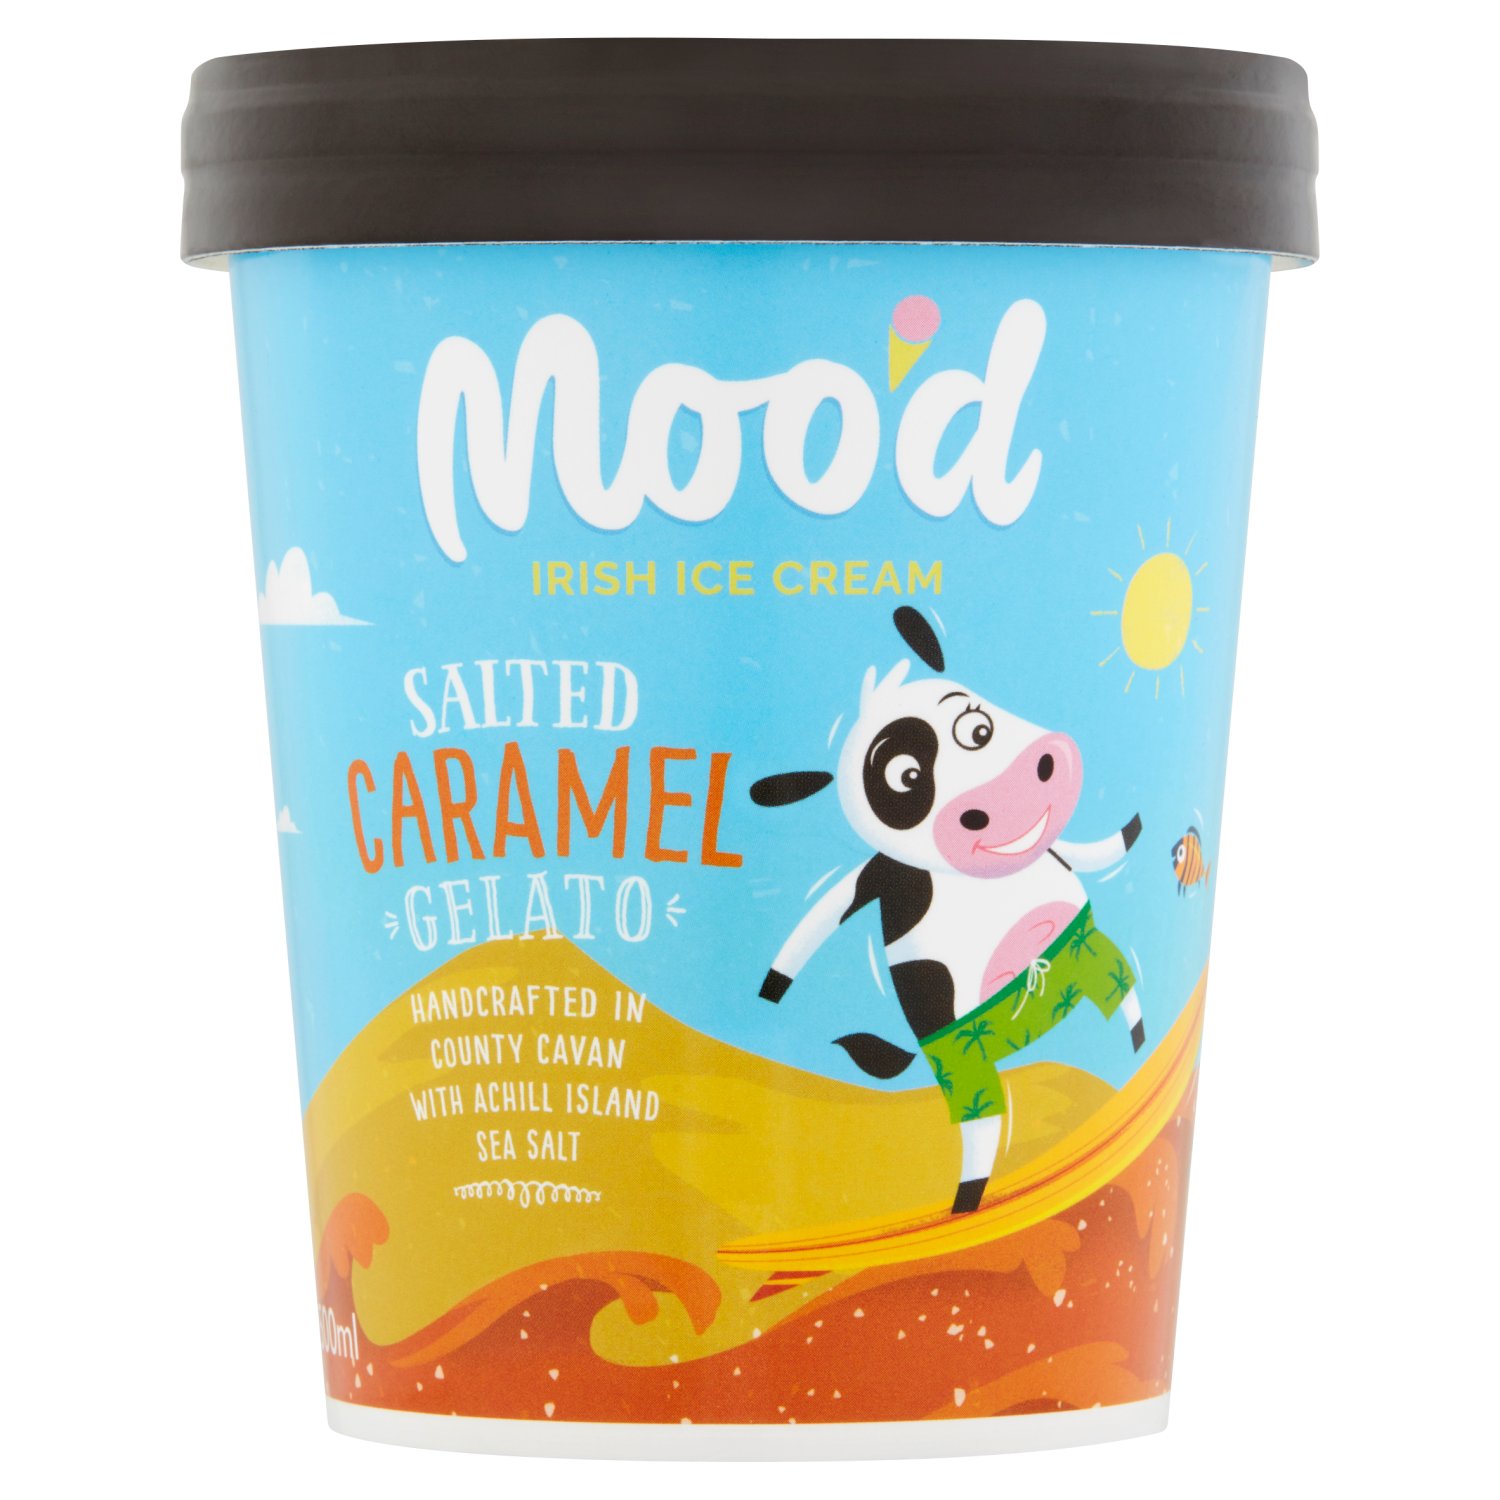 At Moo'd, nothing but the best will do. Made with 100% Irish dairy in small batches by a herd of ice-cream fanatics in Co. Cavan. Our ice-cream has lighter texture, because it's churned at a slower rate so you get more fireworks in the flavour. Enjoy!